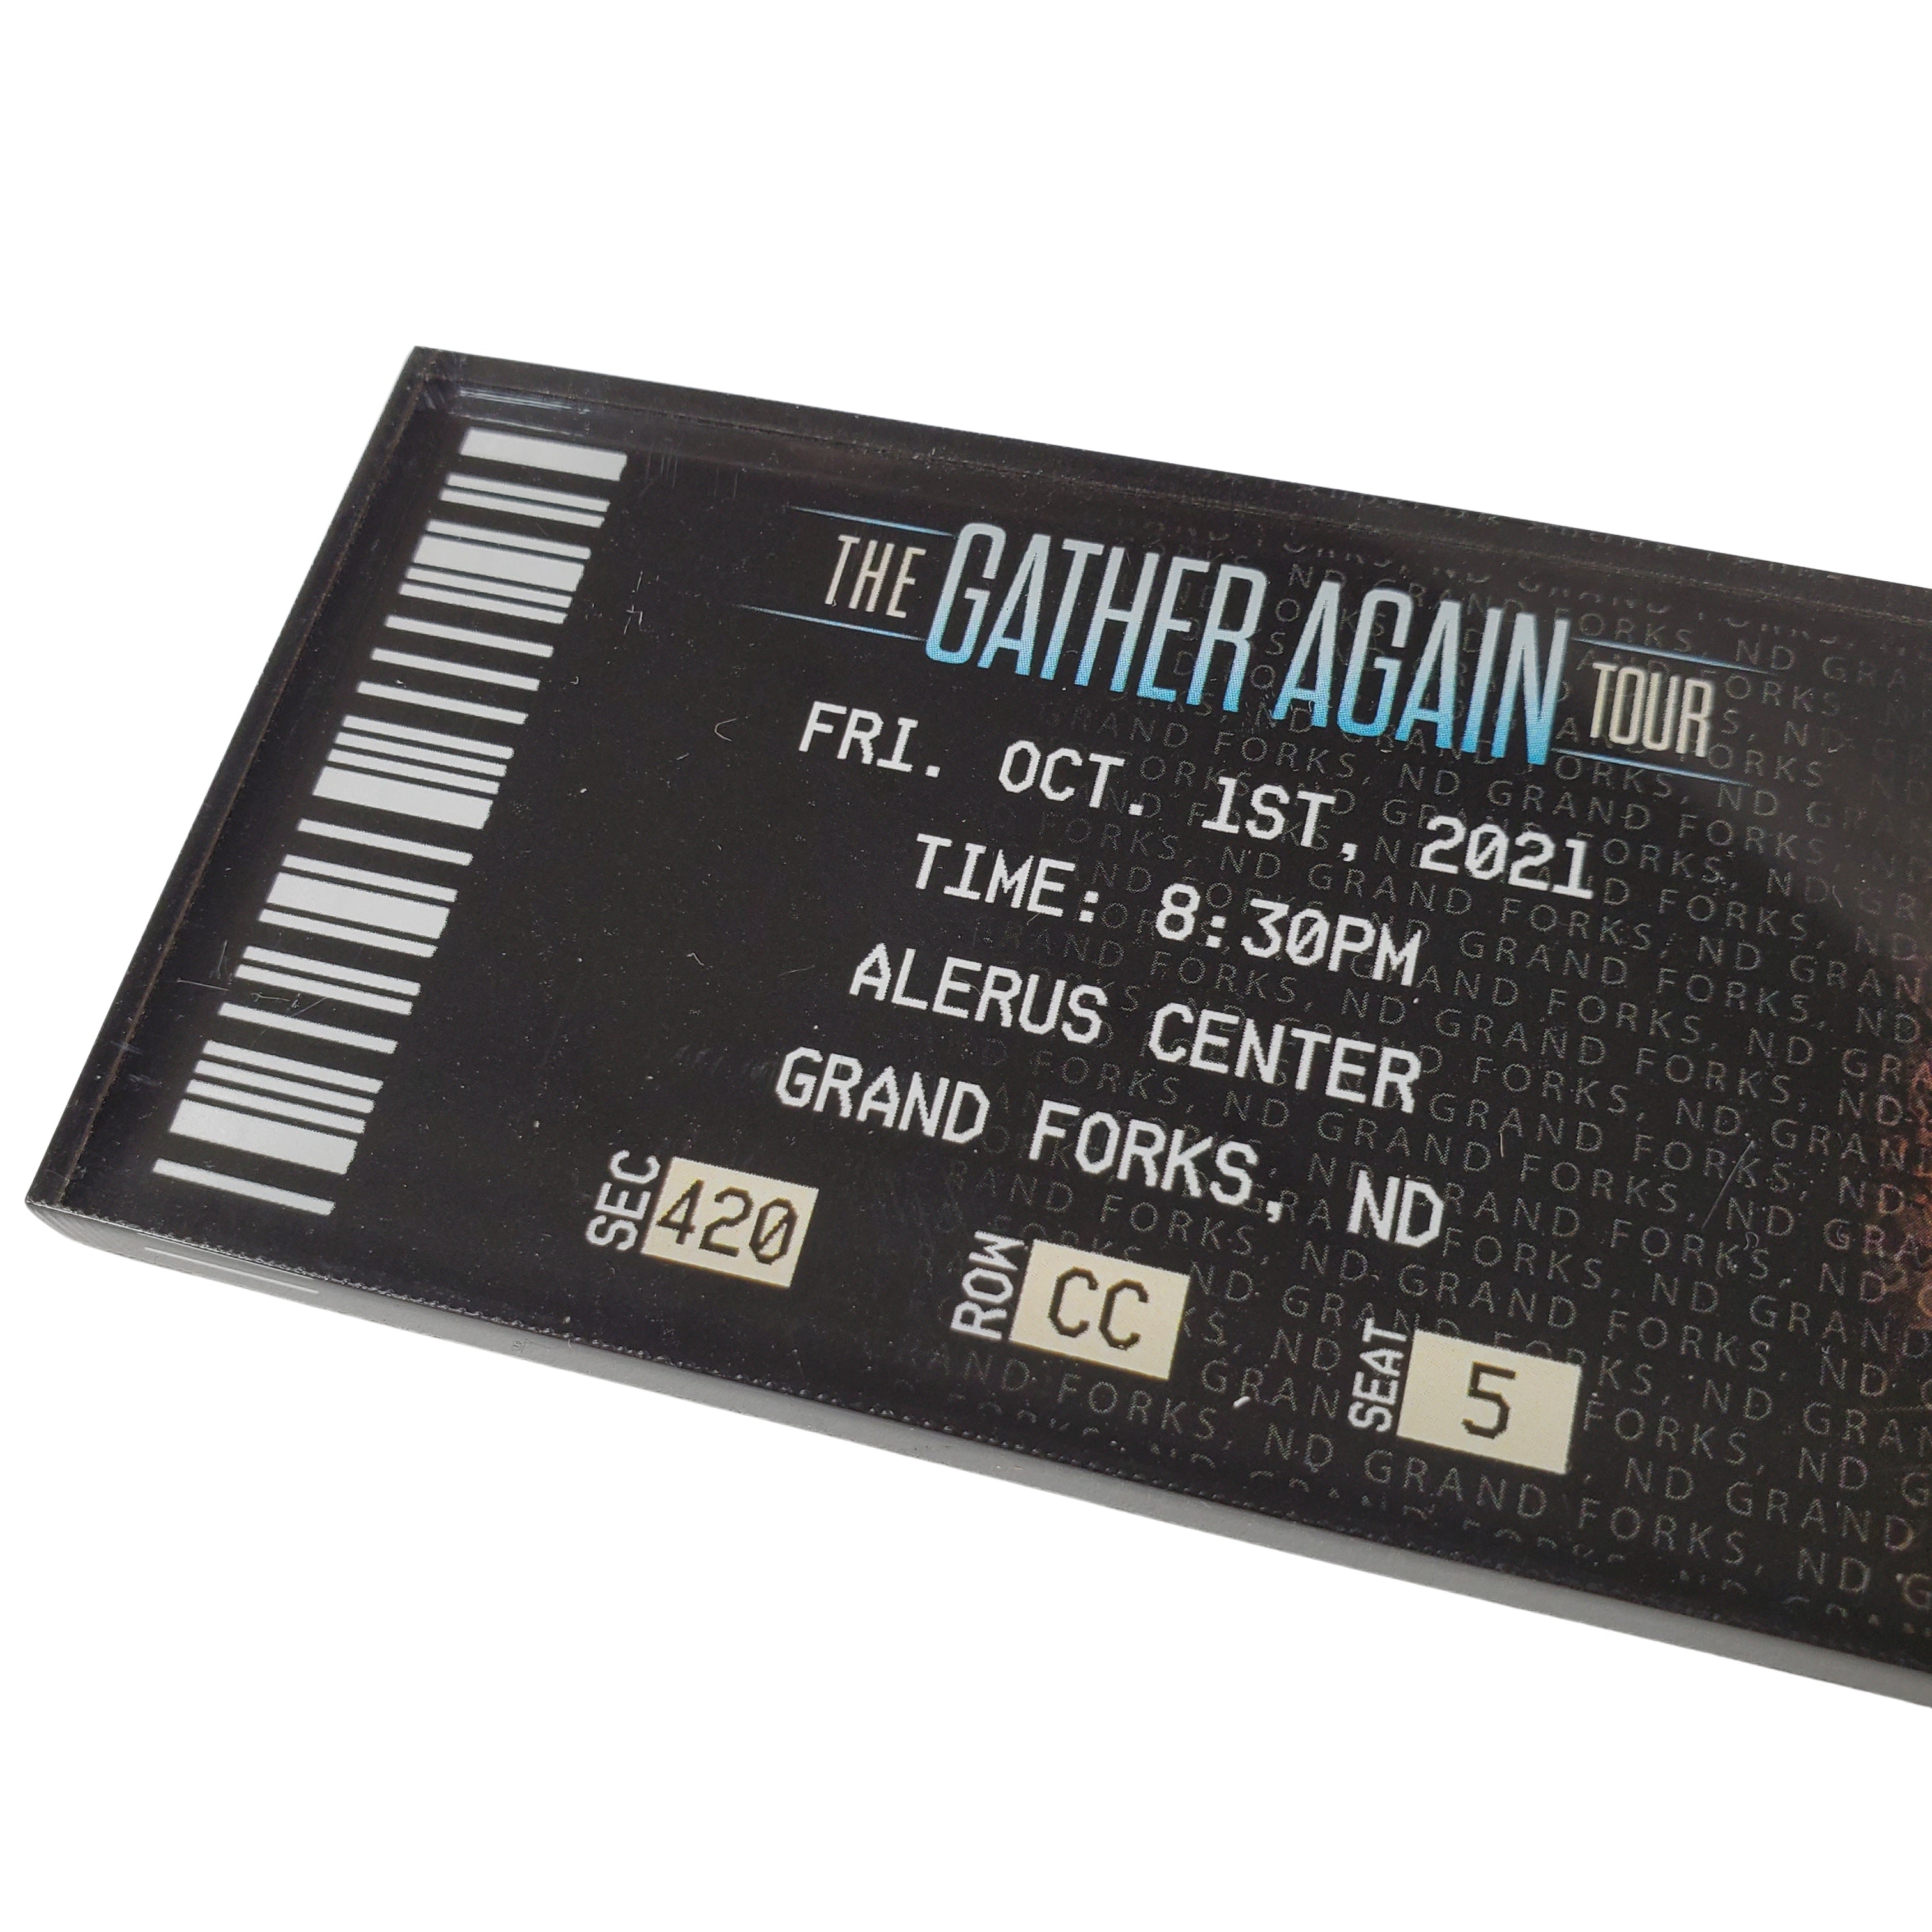 Gather Again Tour Ticket Magnet - Grand Forks, ND